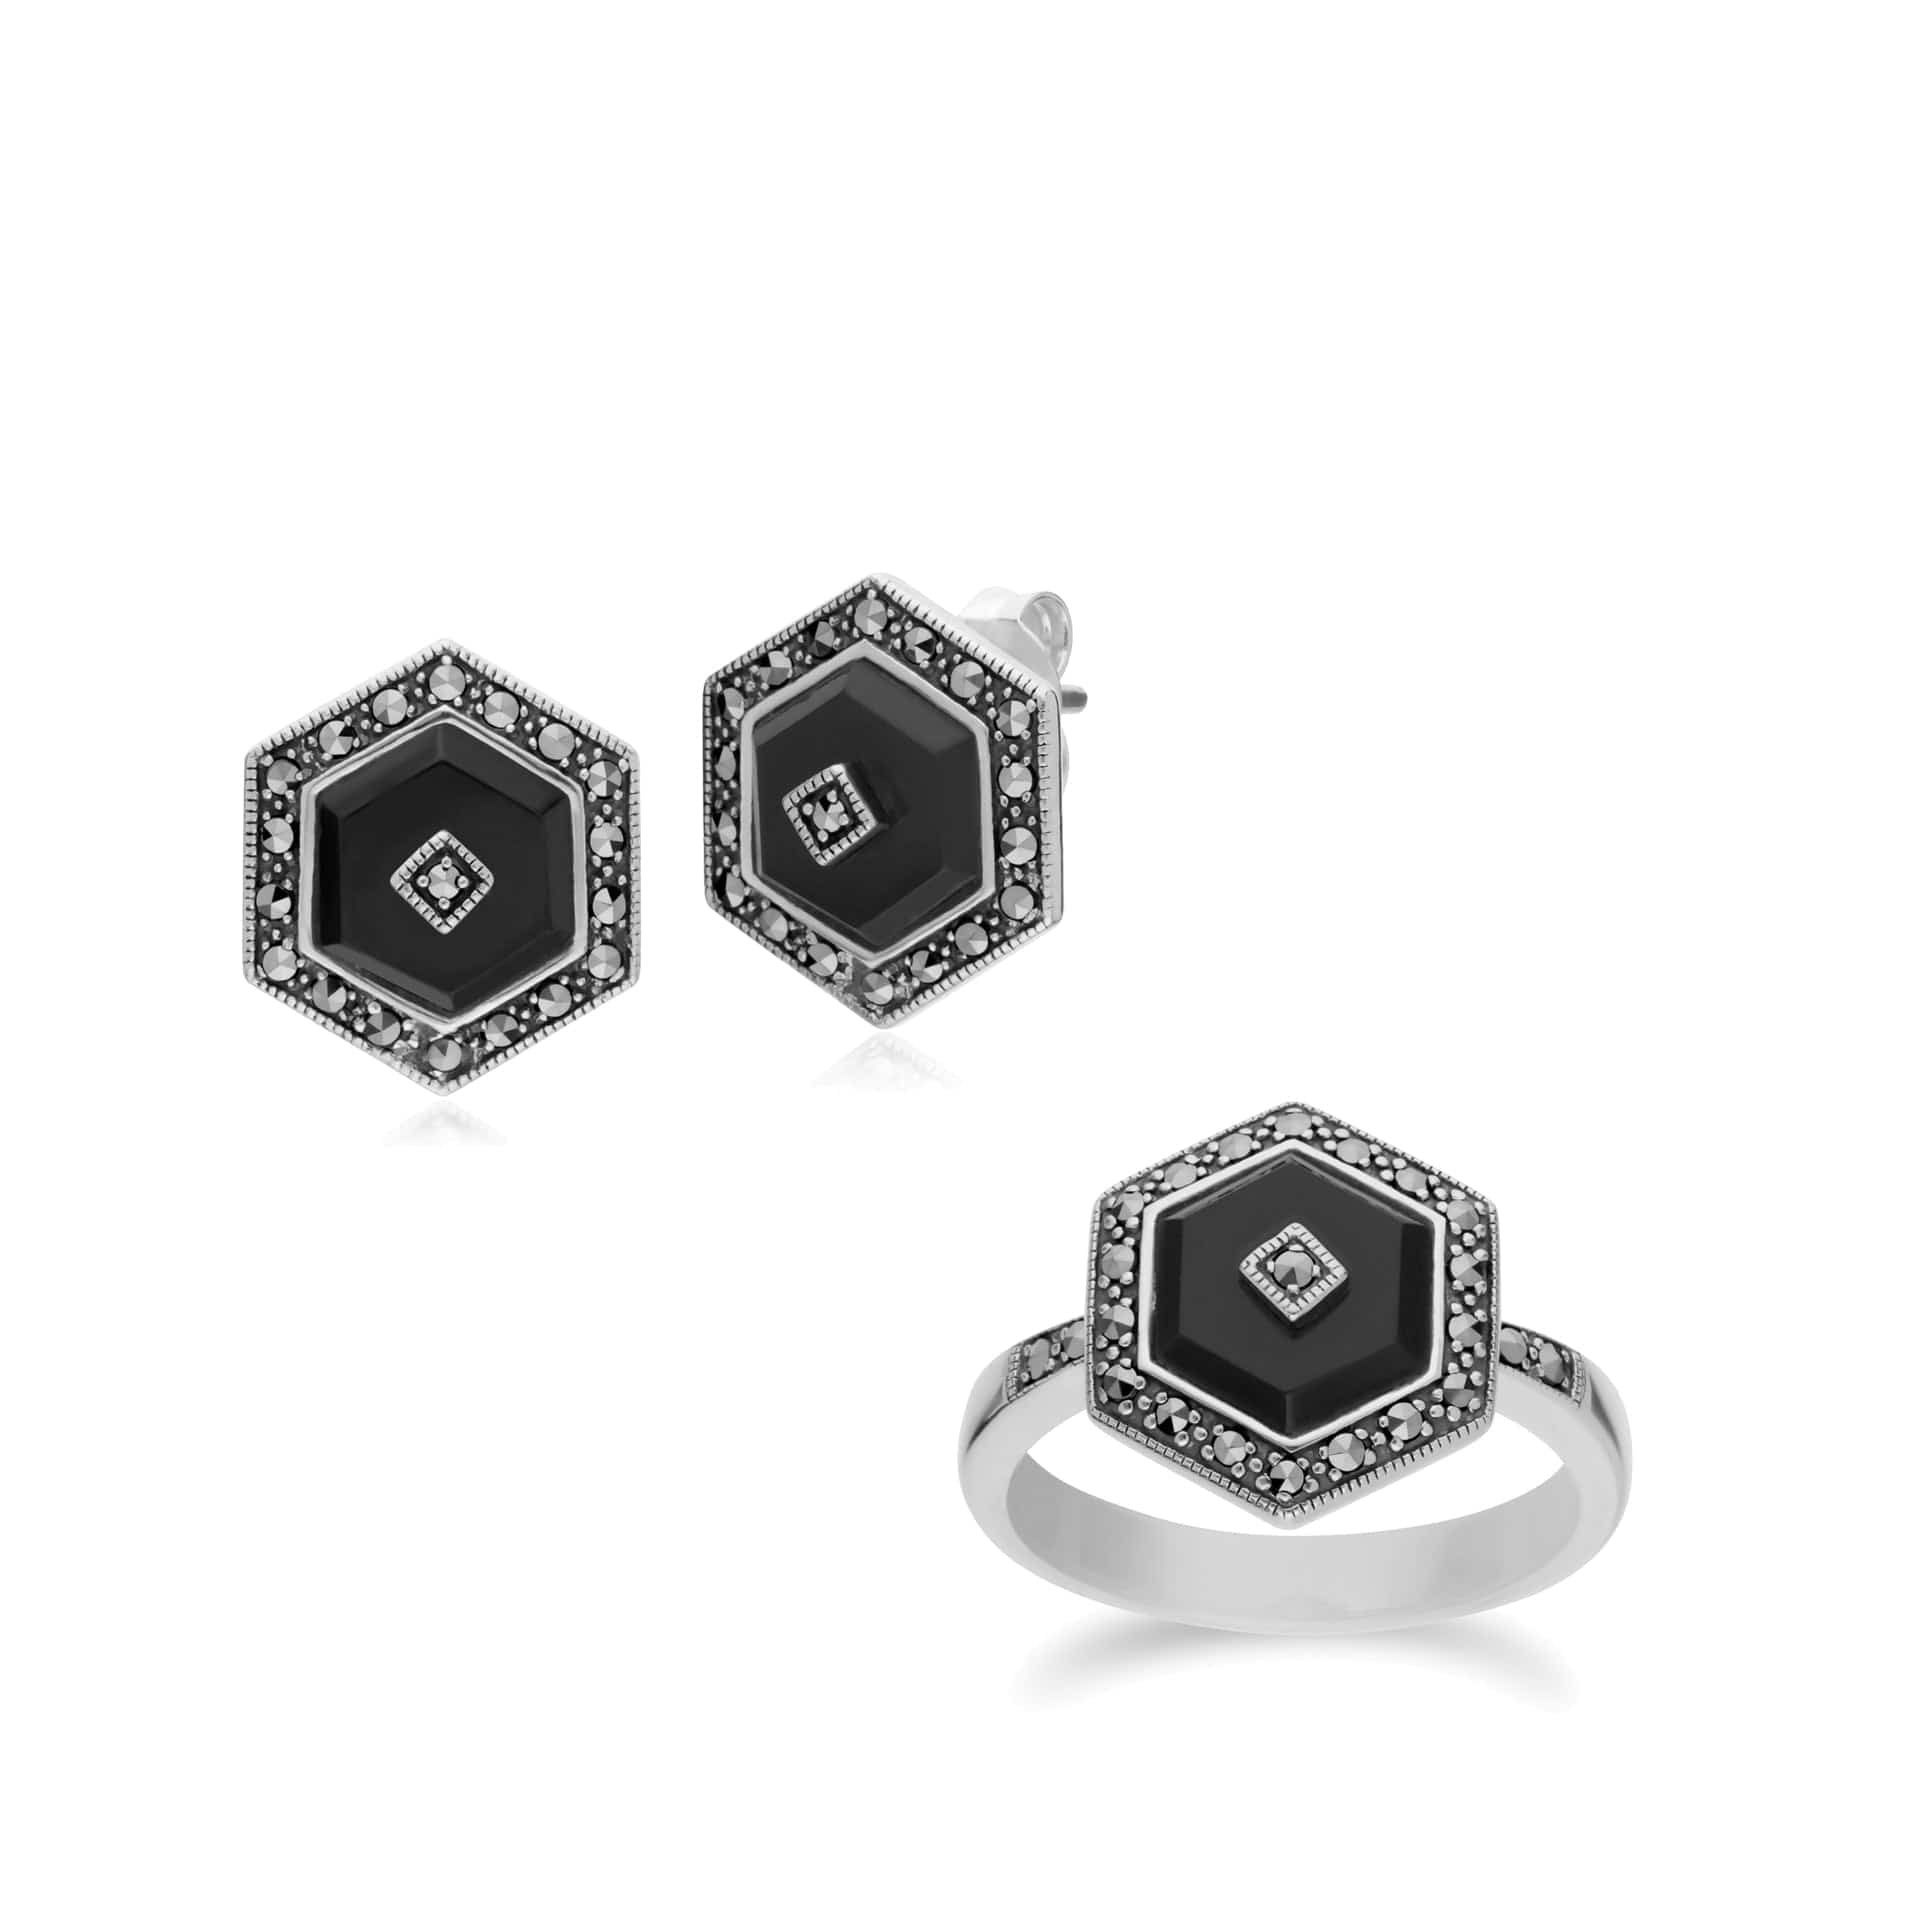 214E872902925-214R605802925 Art Deco Style Black Onyx and Marcasite Hexagon Stud Earrings & Ring Set in 925 Sterling Silver 1